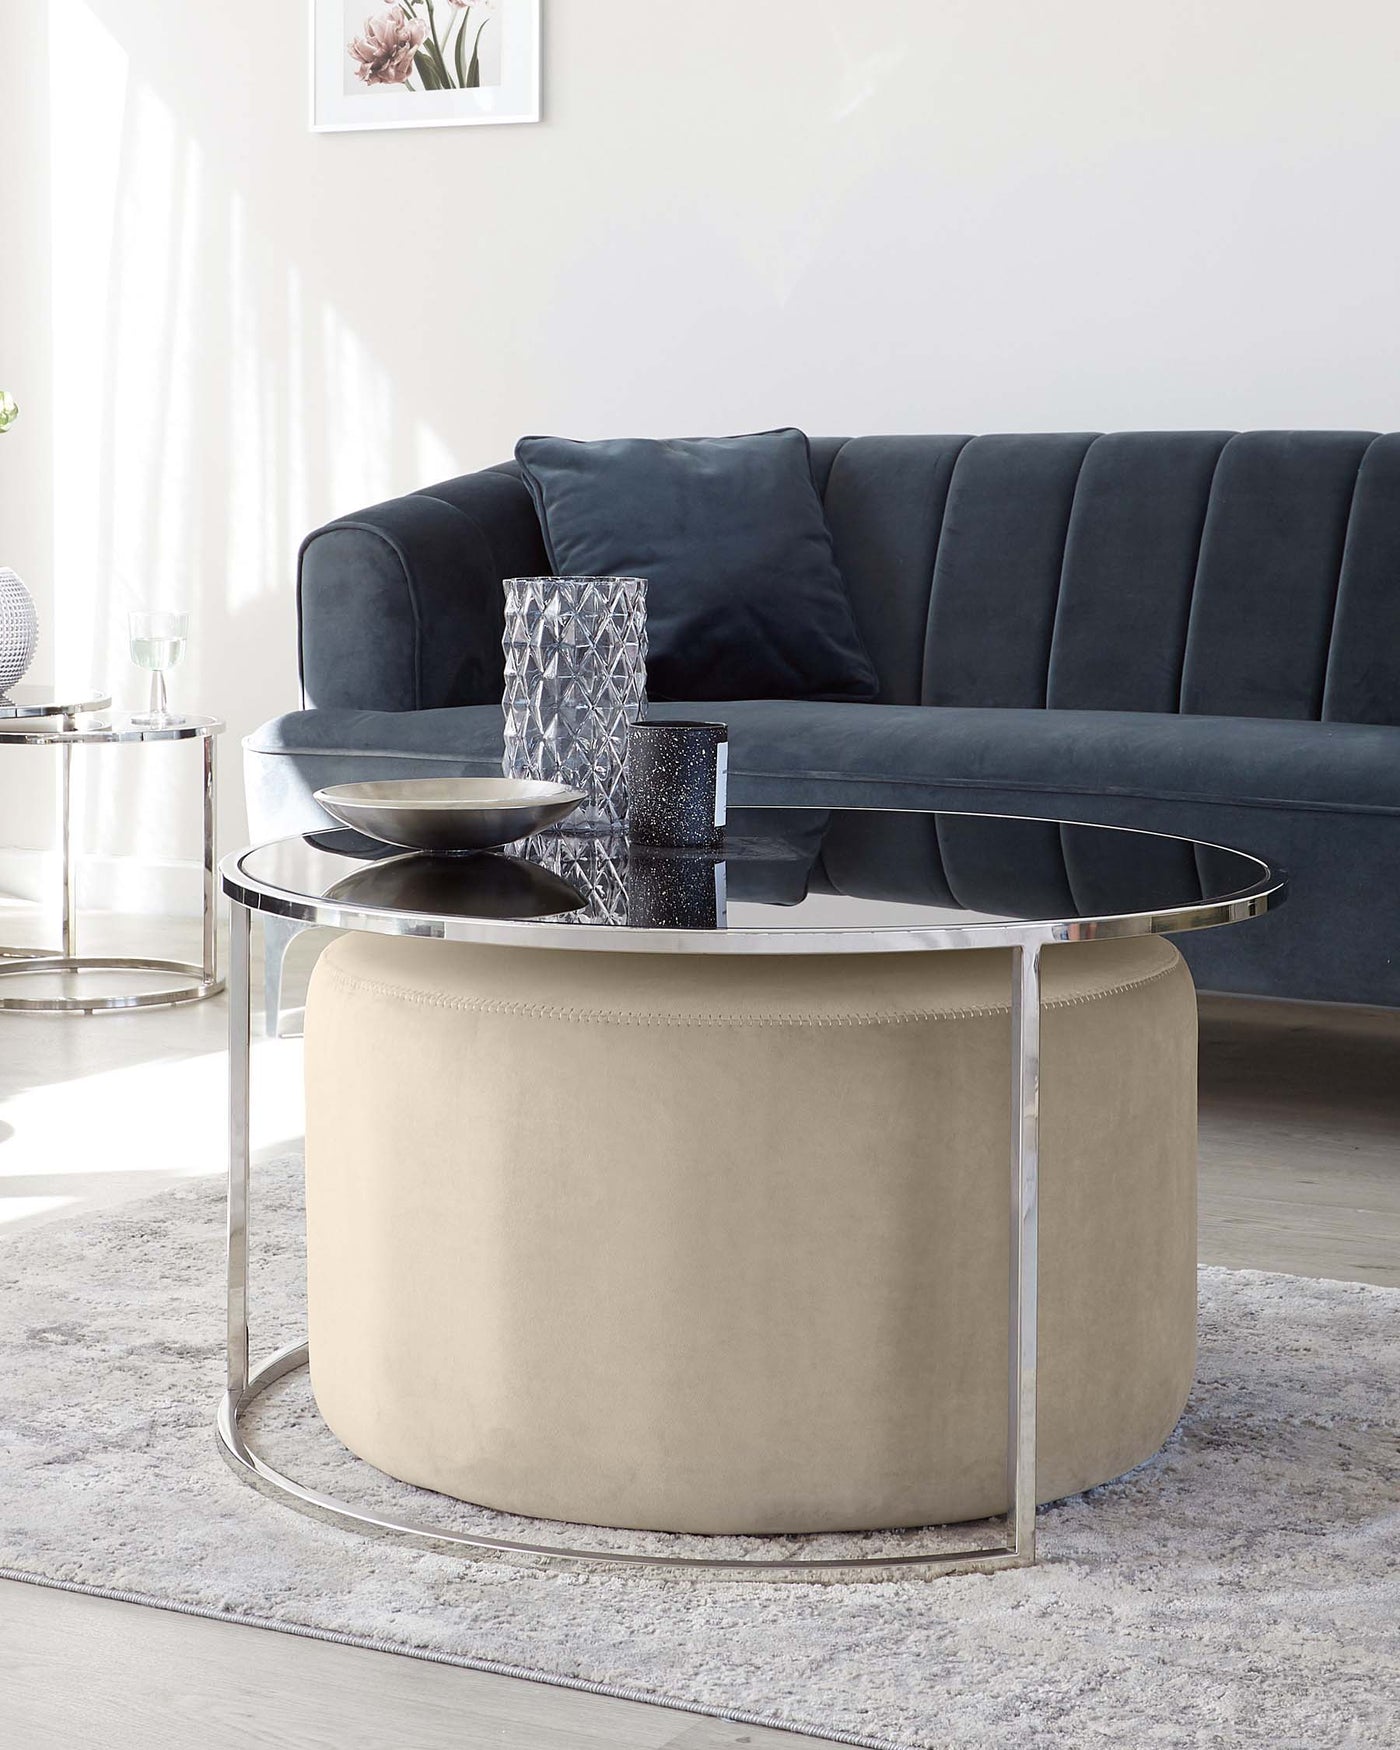 Thea Round Coffee Table & Champagne Pouffe